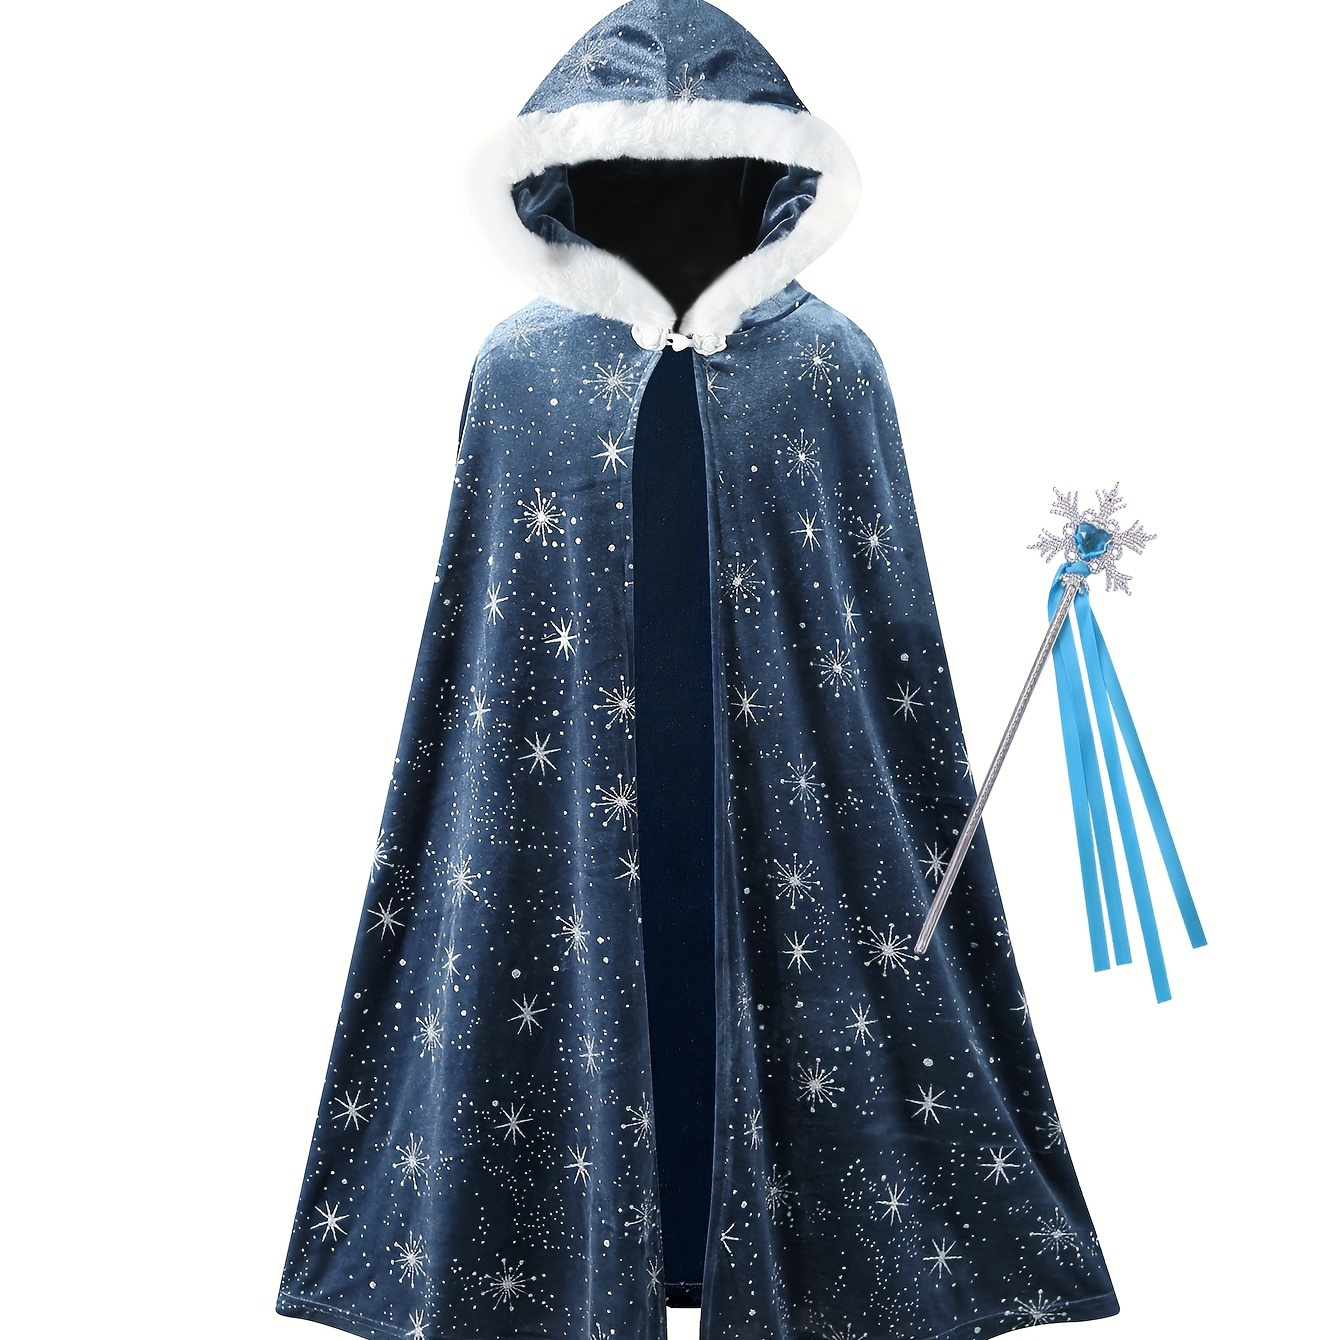 

3pcs Windproof Trendy Girls Snowflake Graphic Hooded Cloak + Crown + Magic Wand Set For Party Performance Birthday Gift For 6-9y